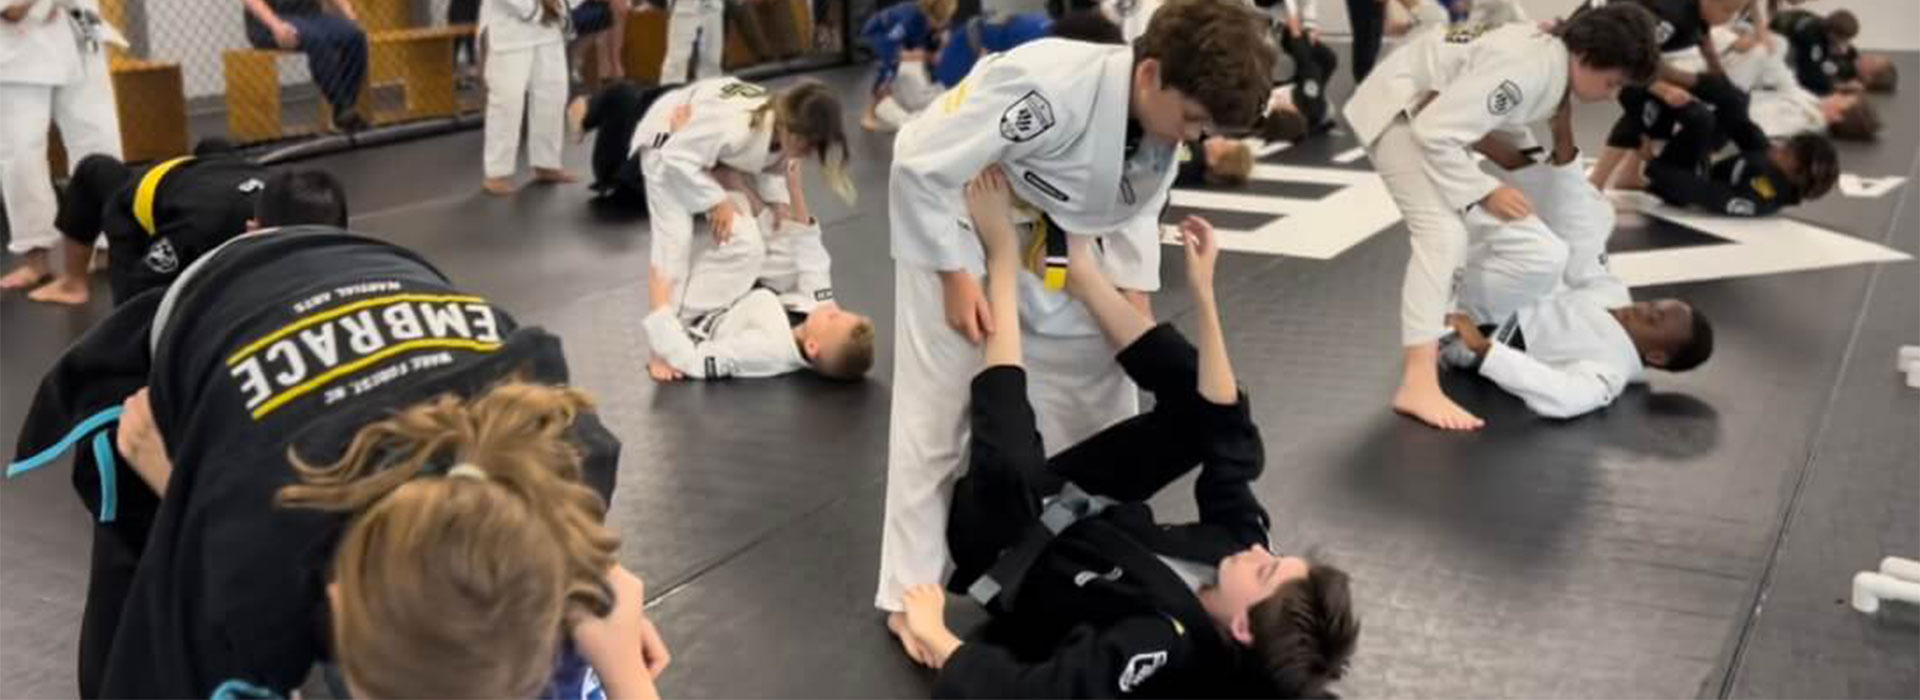 Top 5 Best Martial Arts Schools To Join In Wake Forest